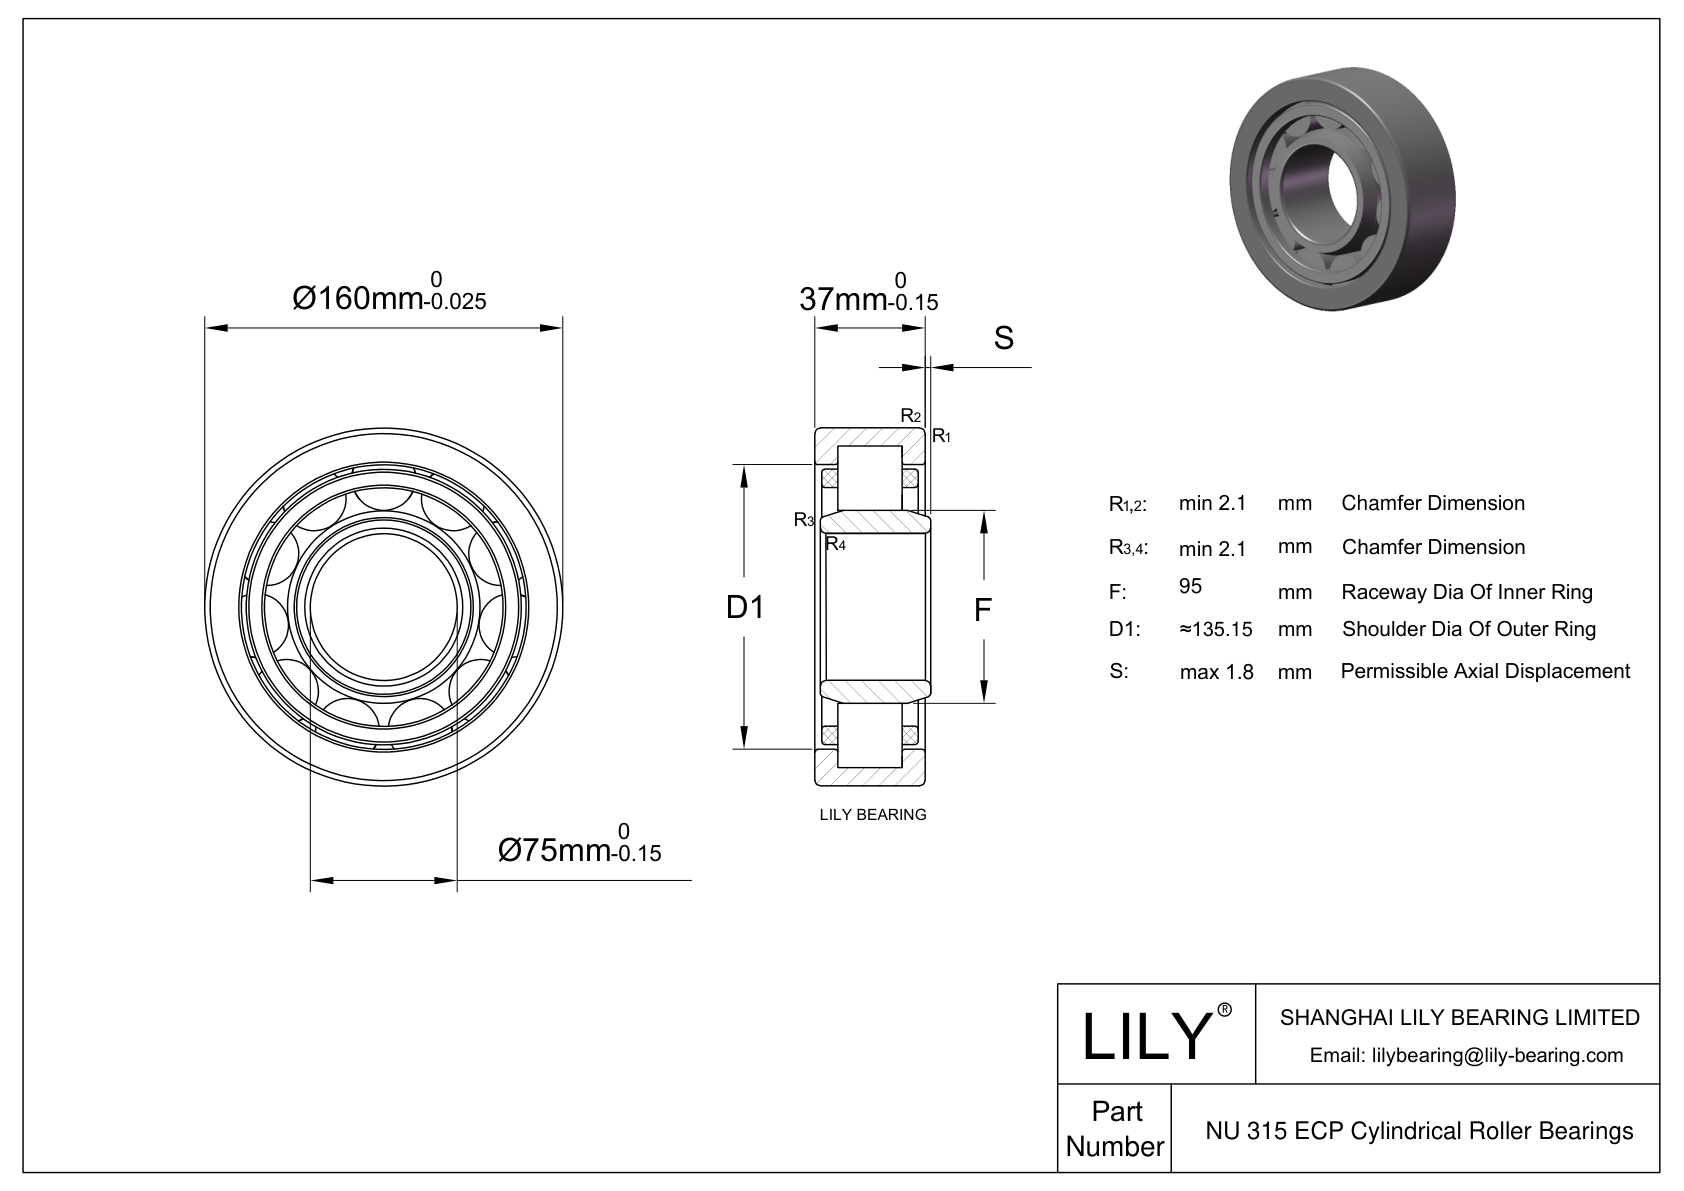 NU 315 ECP/VL0241 Ceramic Coated Cylindrical Roller Bearings cad drawing